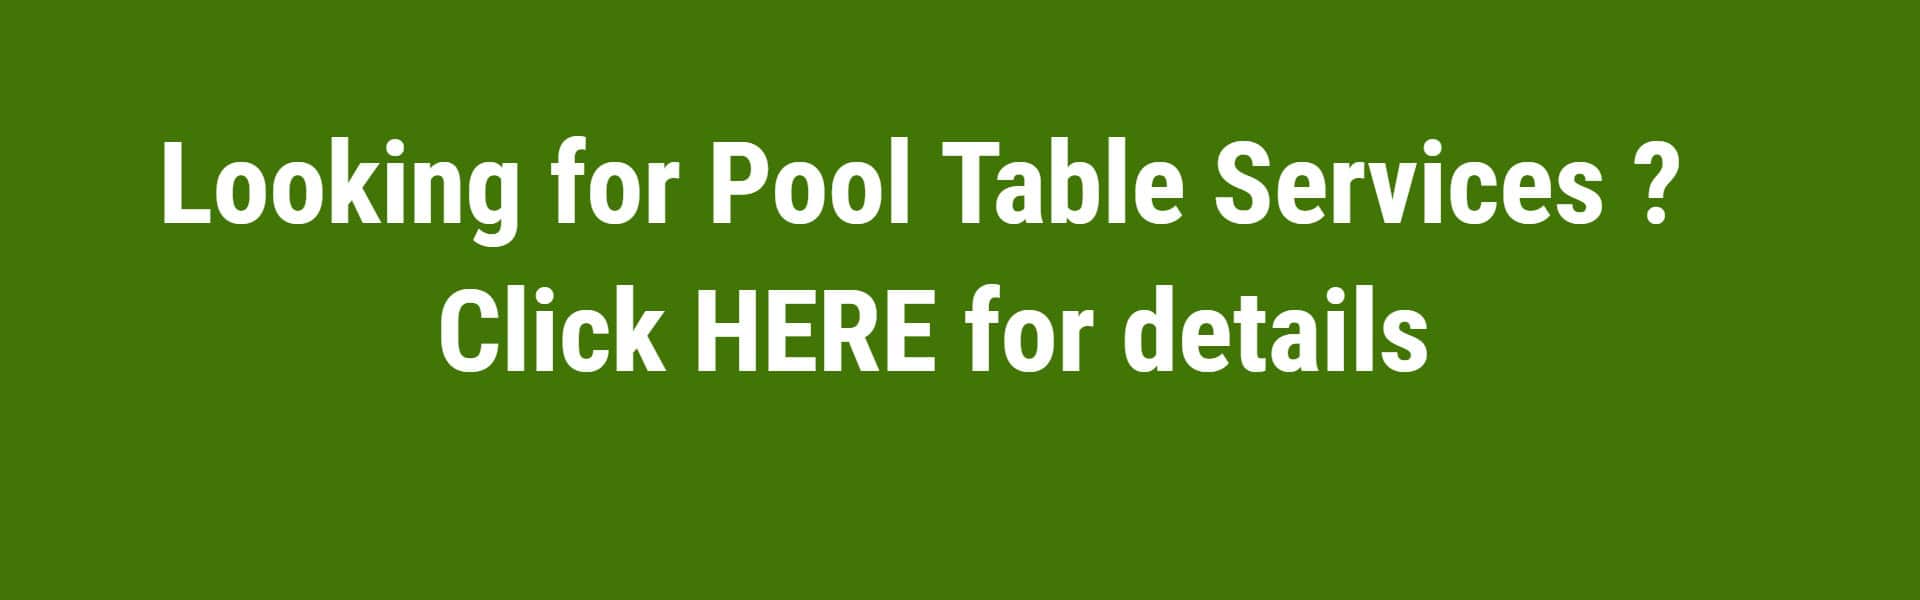 pool table services banner